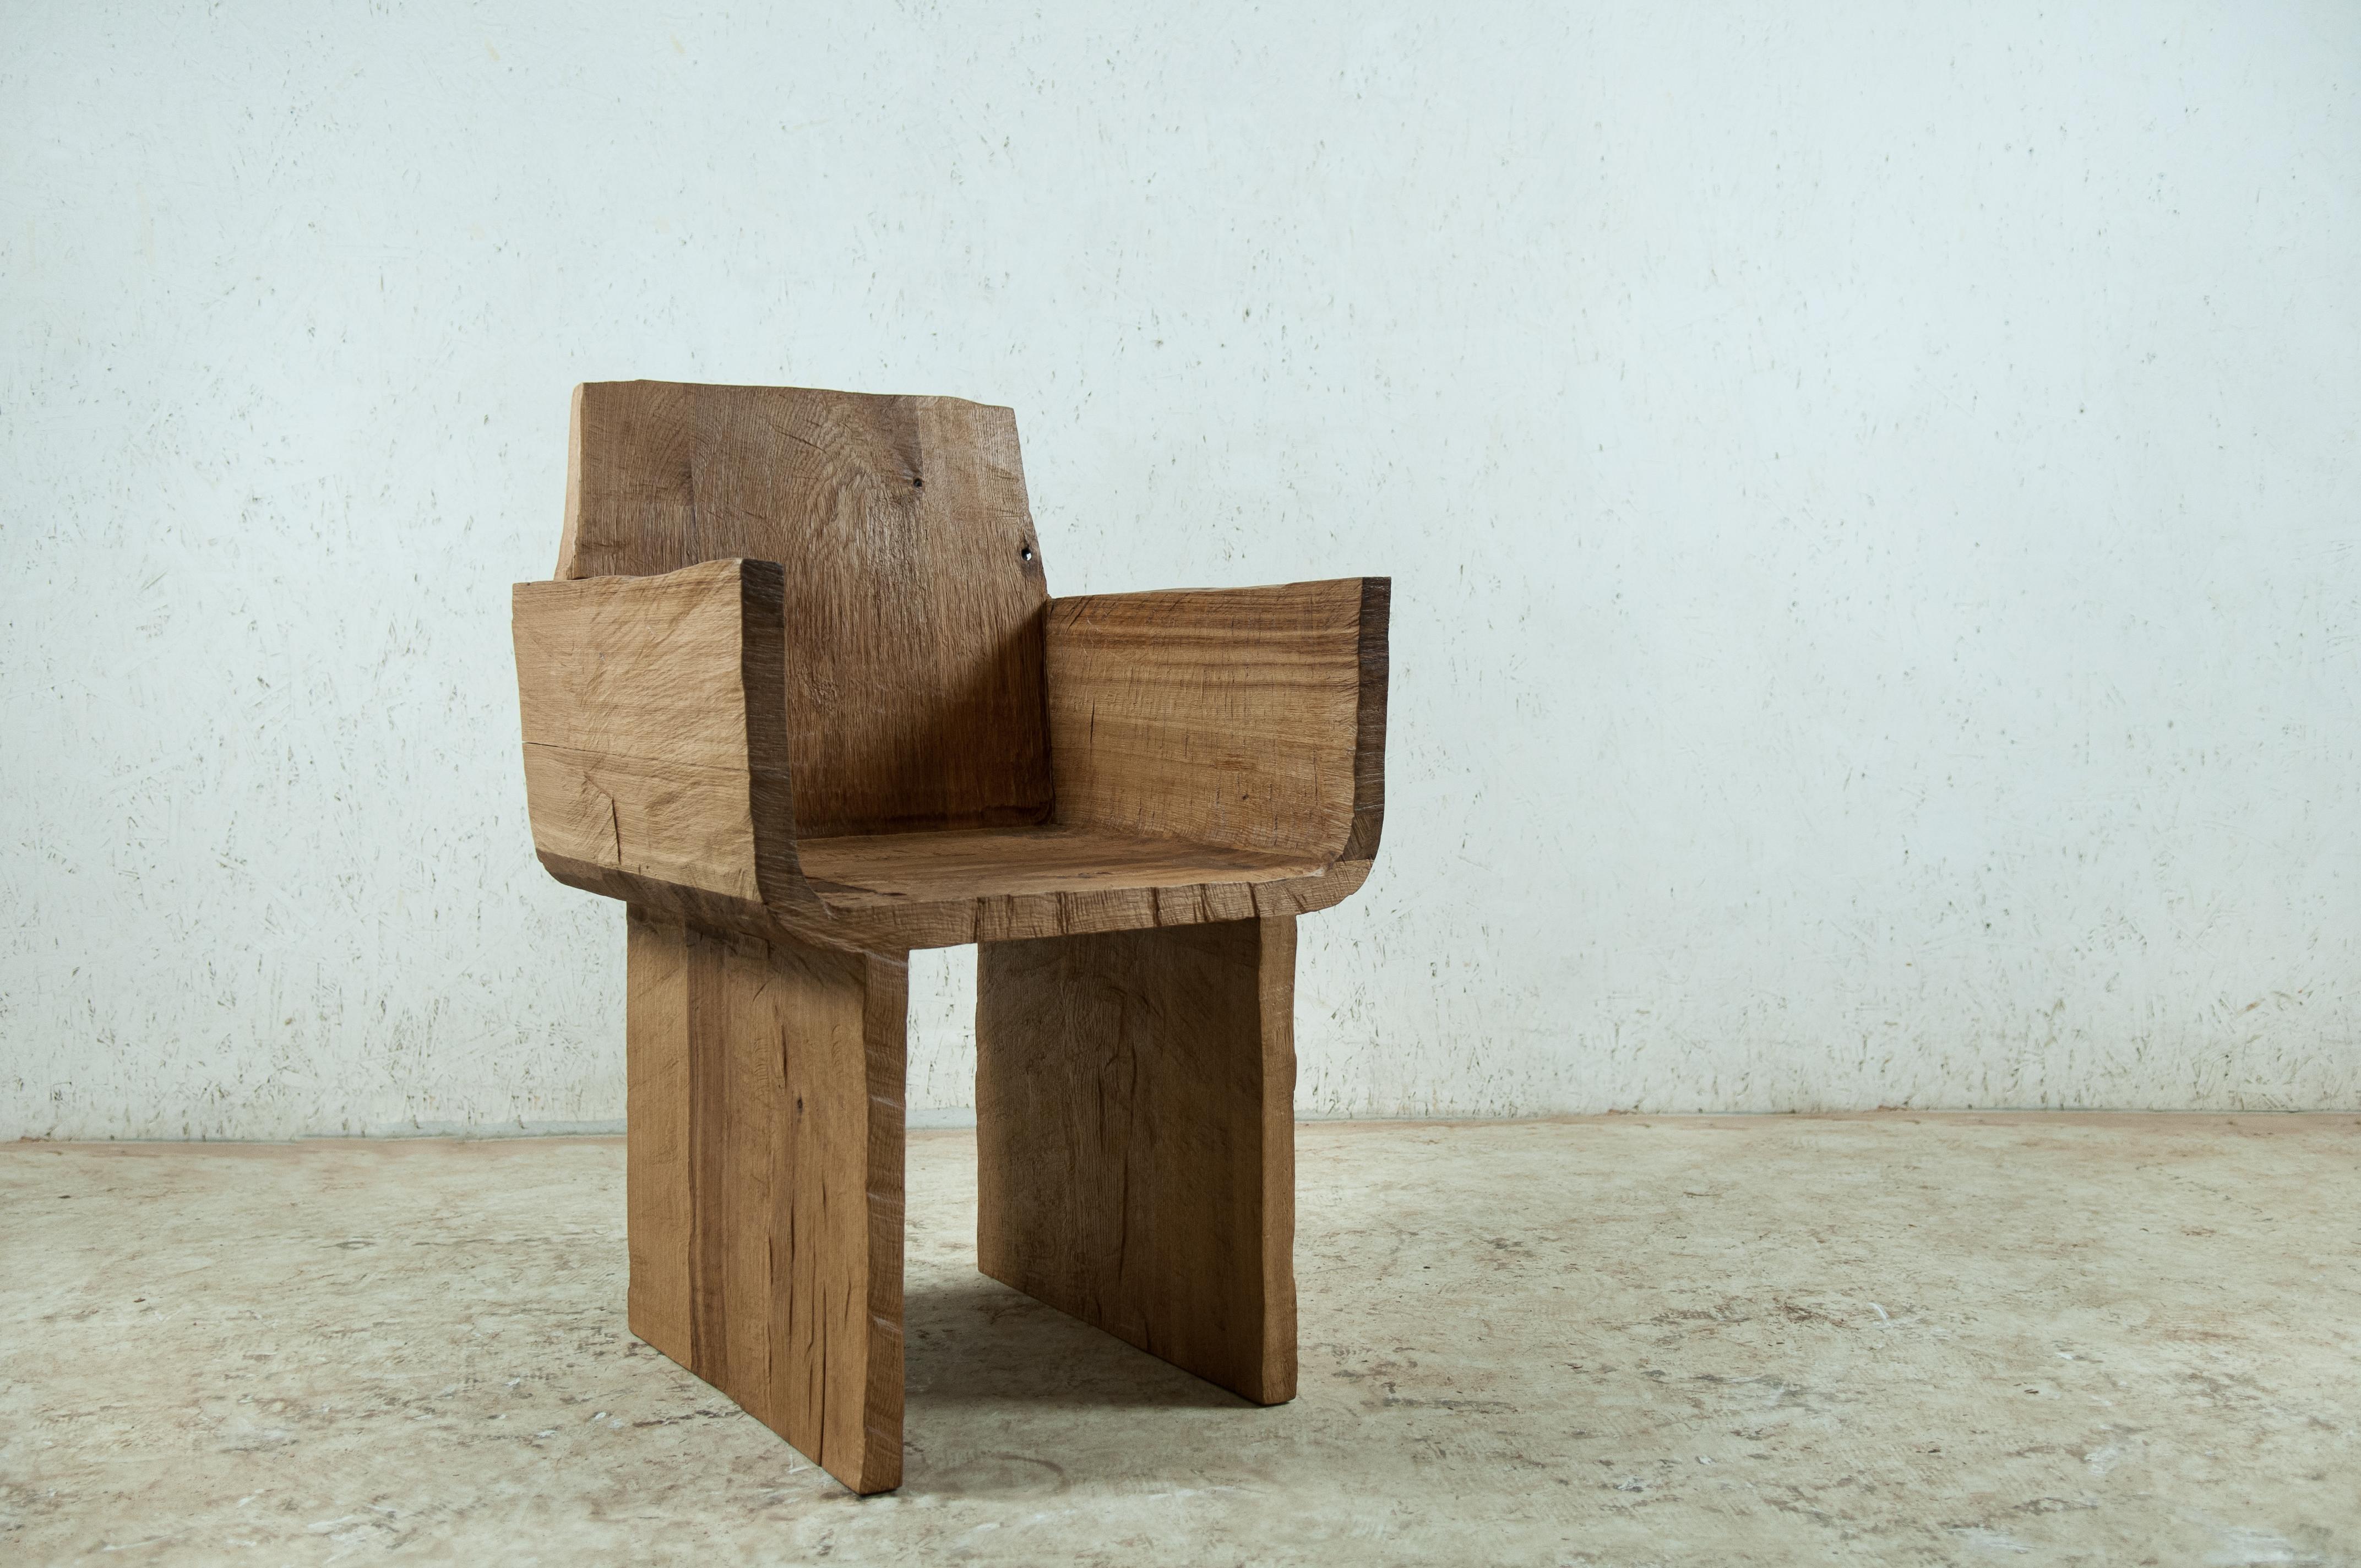 Armchair made of solid oak (+ linseed oil)
(Outdoor use OK)

Dimensions: H. 82 x 48 x 48 cm (SH 45 cm)

Founded by artist Denis Milovanov, SÓHA design studio conceives and produces furniture design and decorative objects in solid oak in an authentic